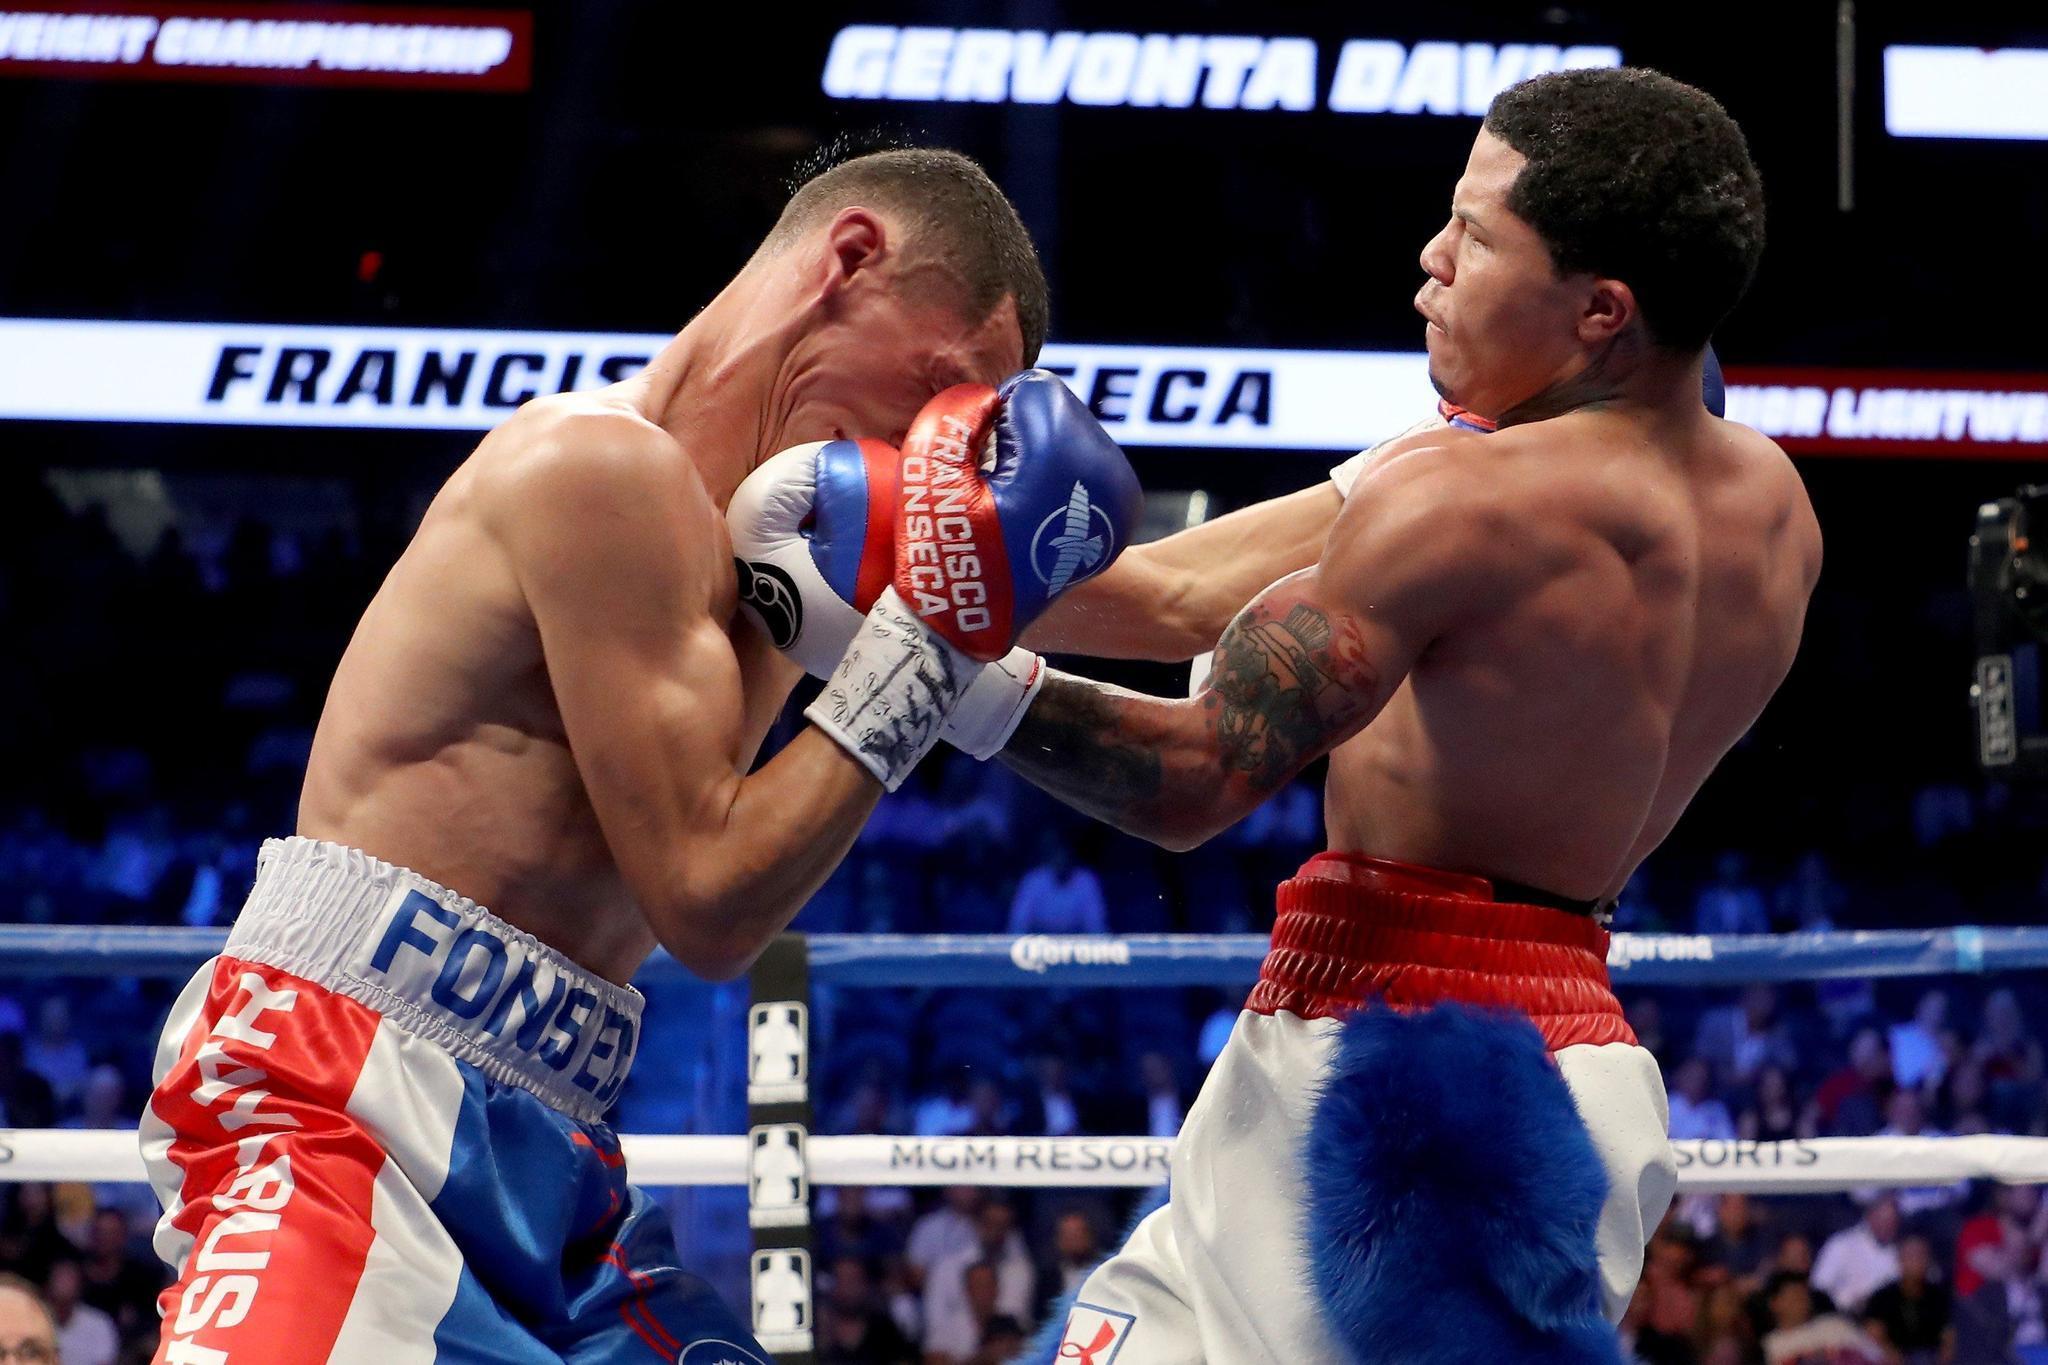 Baltimore's Gervonta Davis wins on controversial knockout in eighth round - Baltimore Sun2048 x 1365